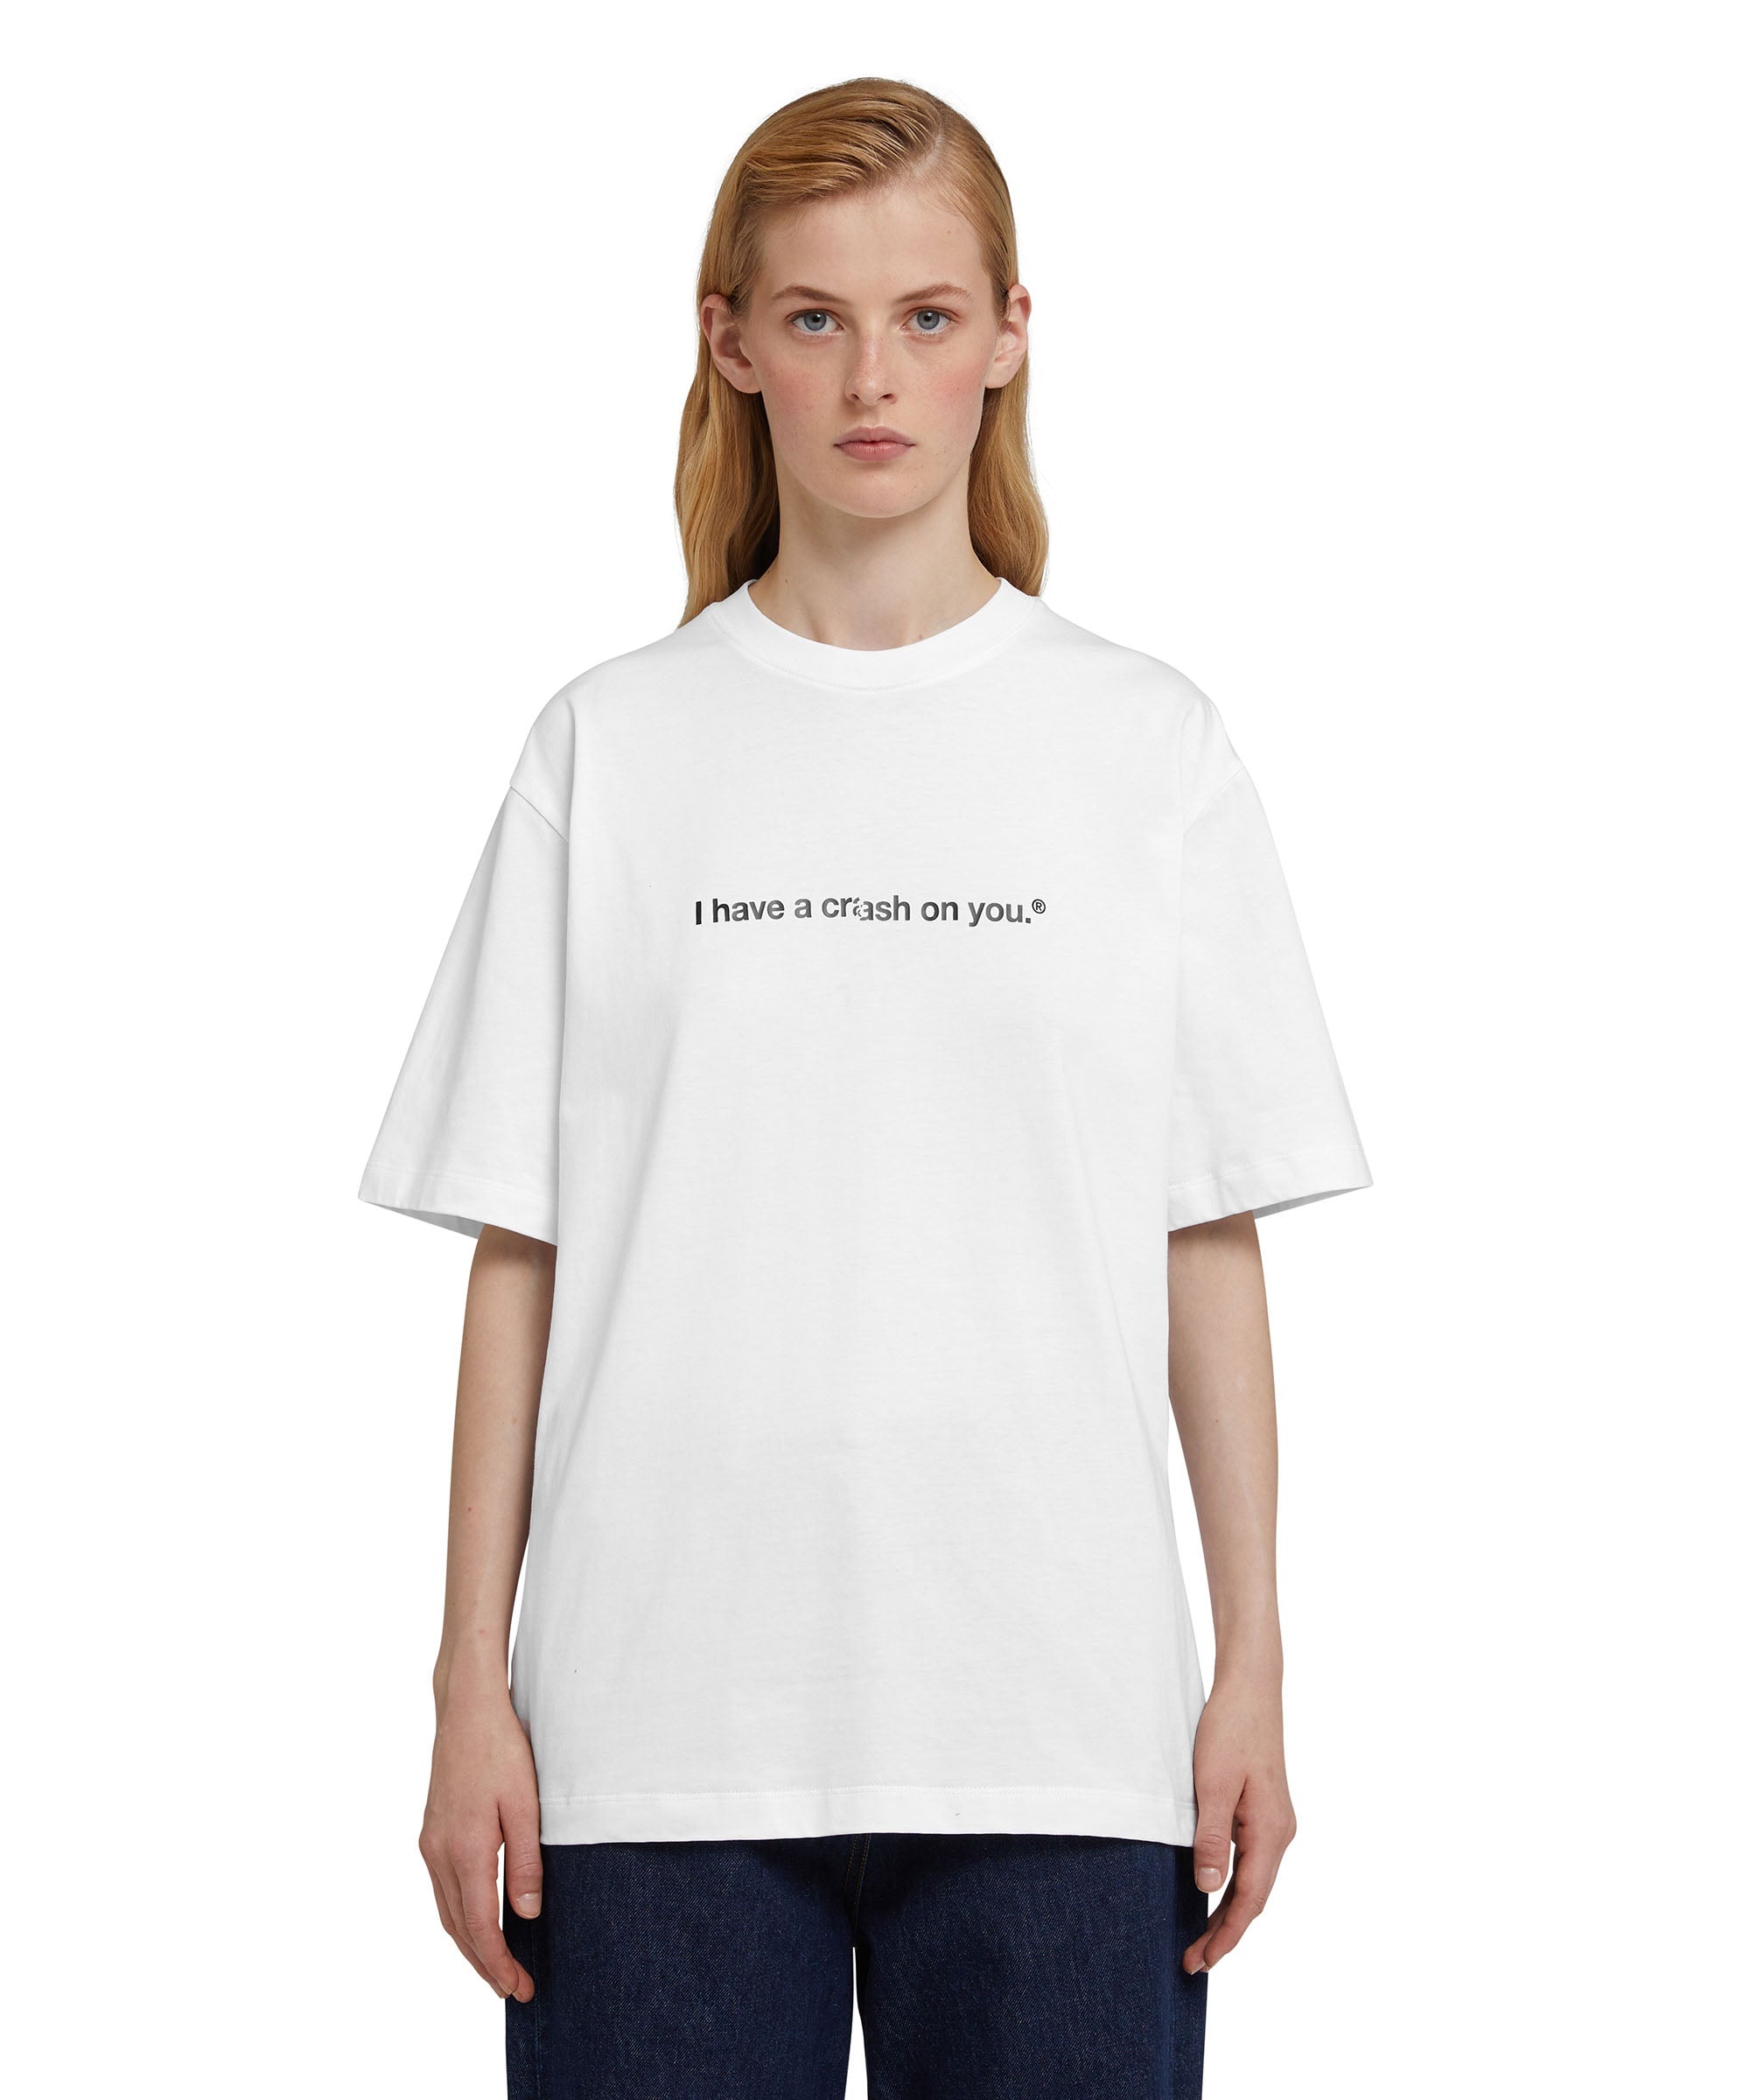 Cotton T-shirt with Crash quote - 6